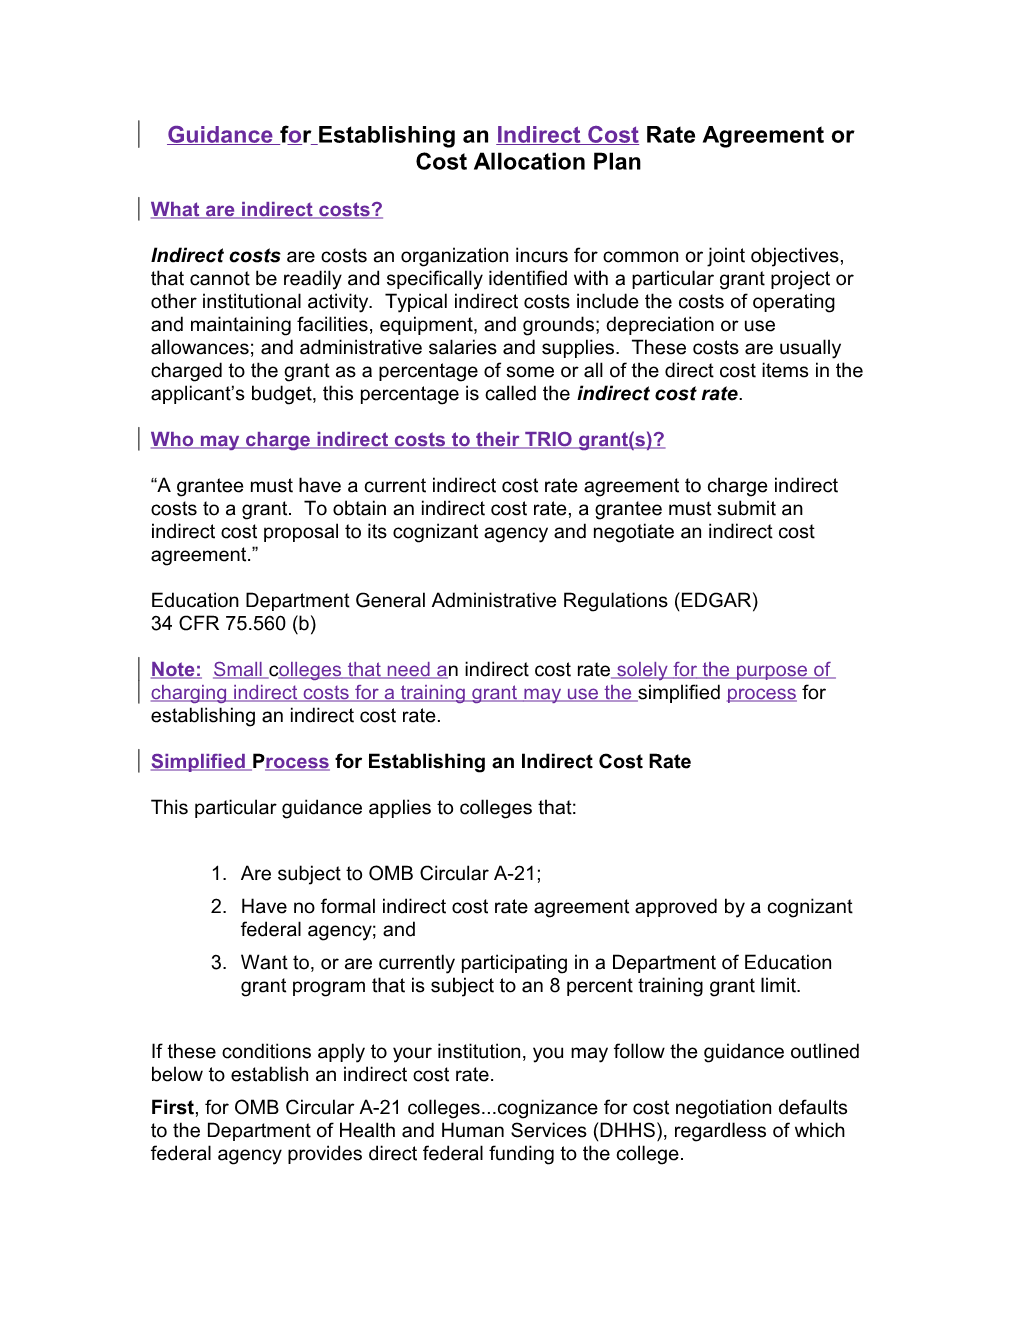 Guidance for Establishing an Indirect Cost Rate Agreement Or Cost Allocation Plan (MS Word)